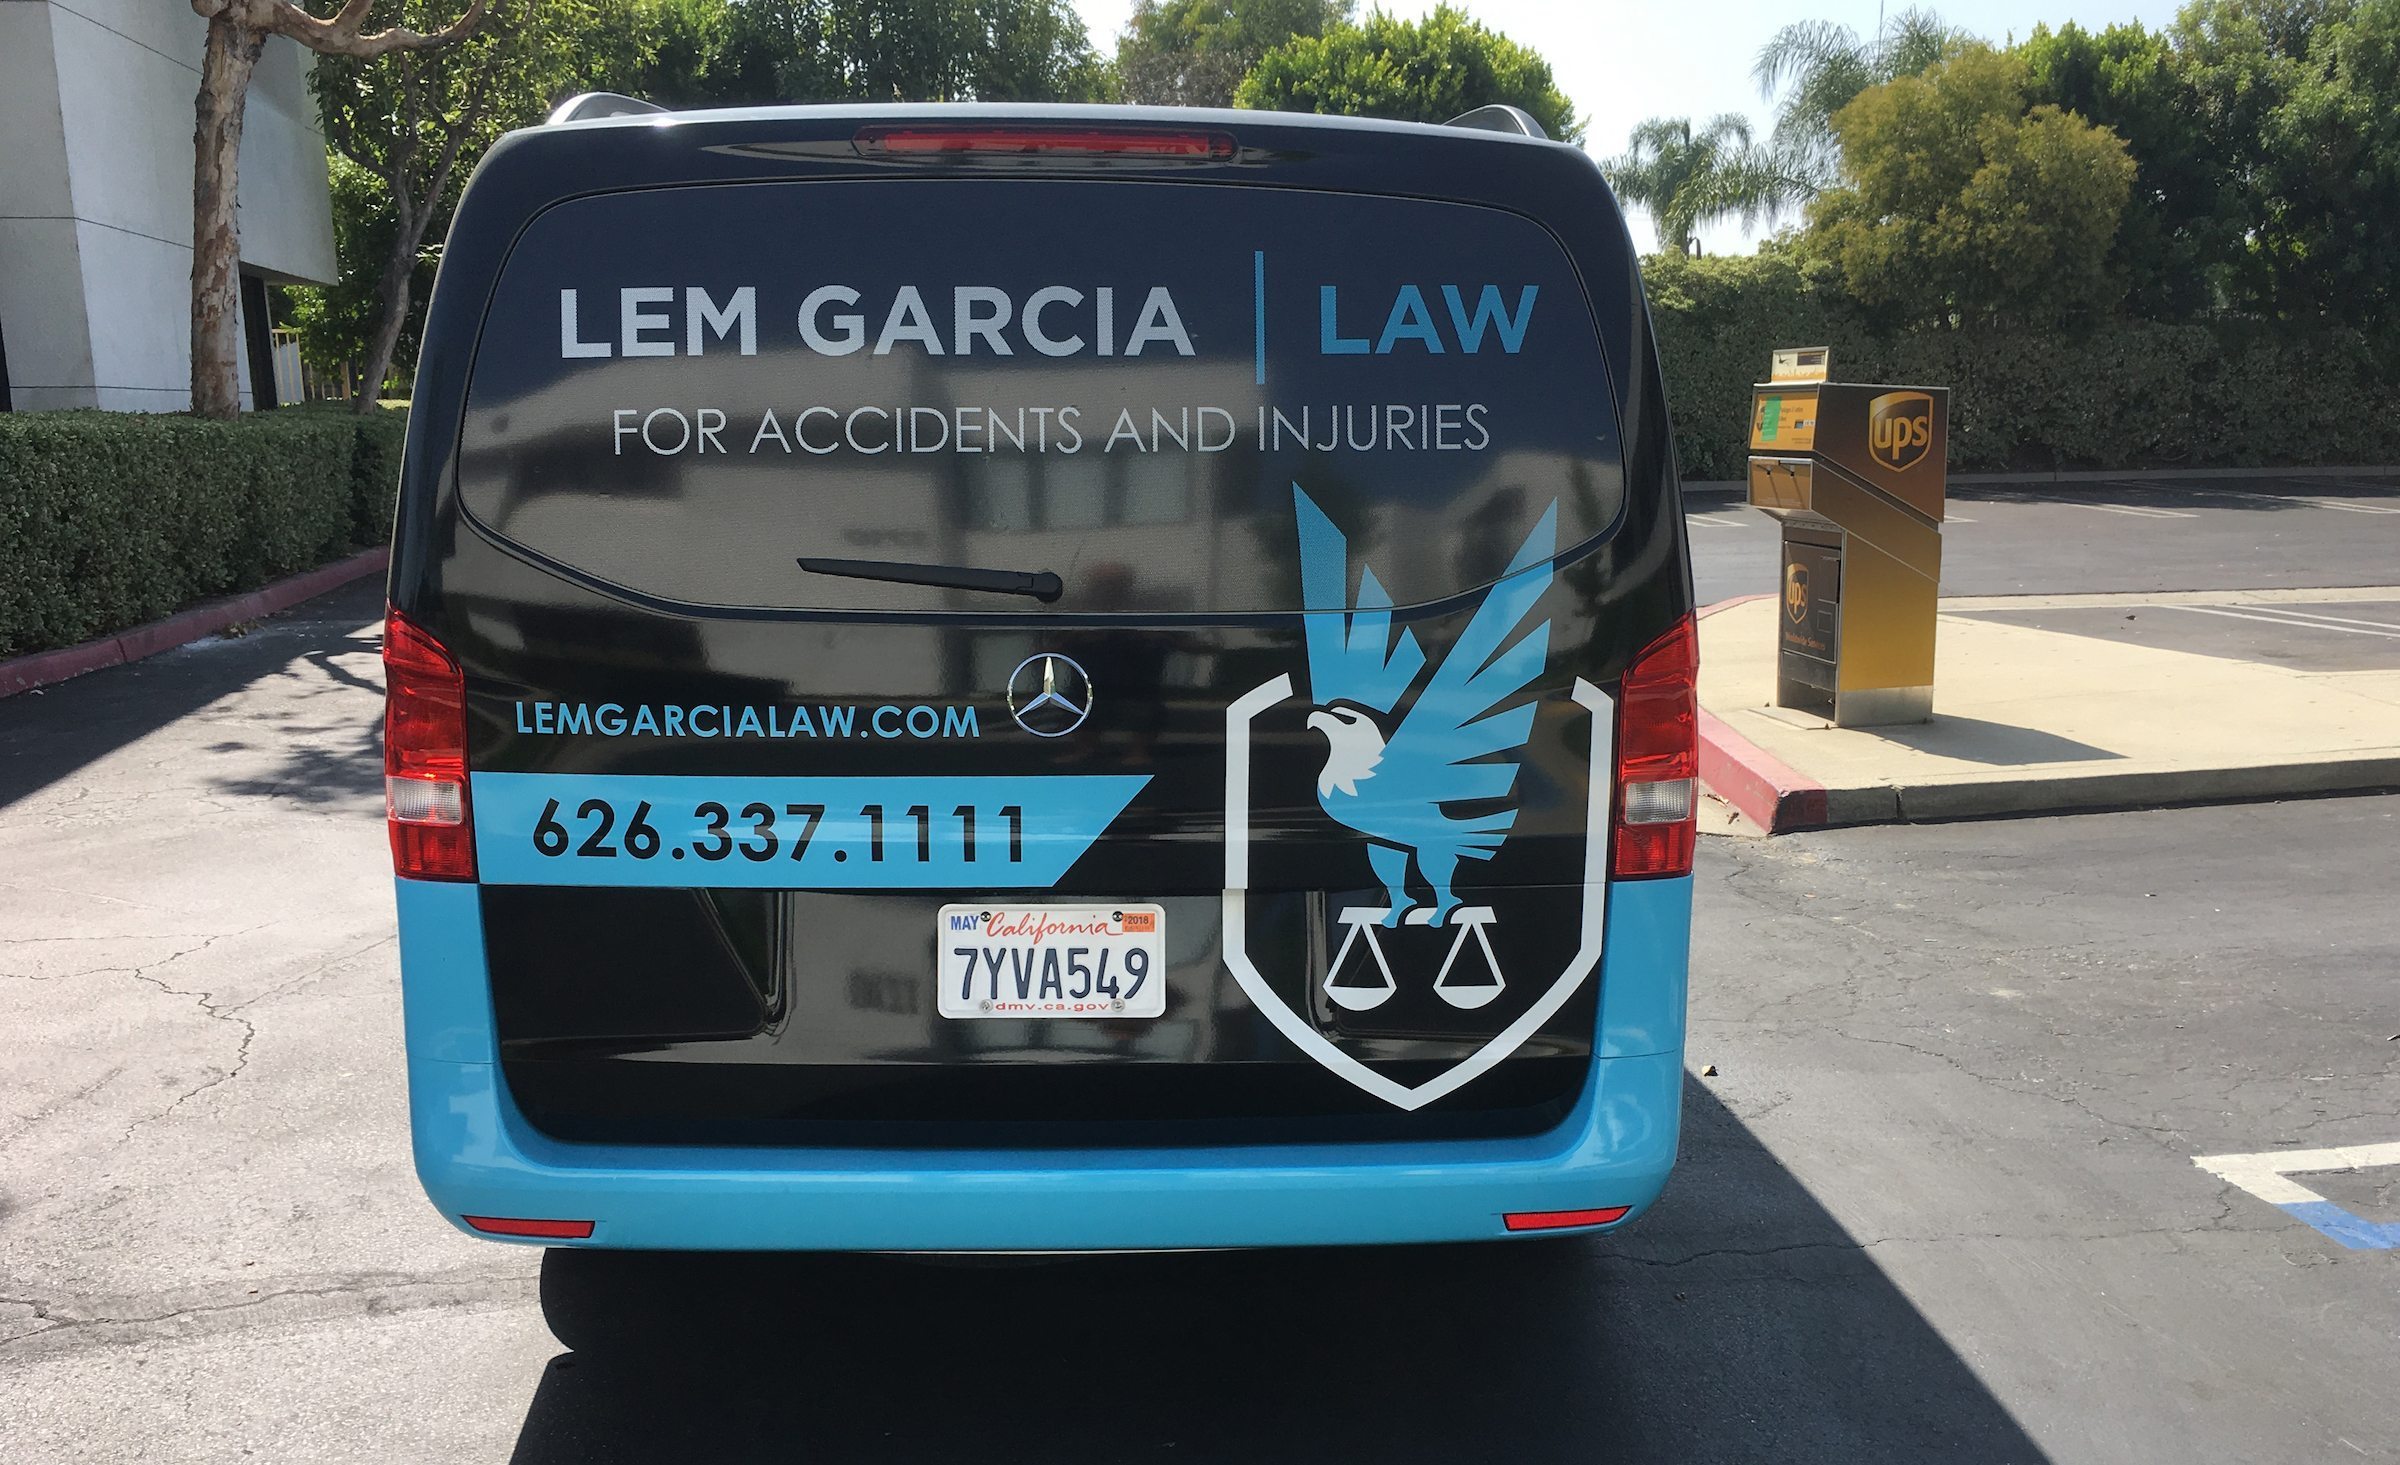 Vehicle wrap design for Lem Garcia Law, a California-based law firm.